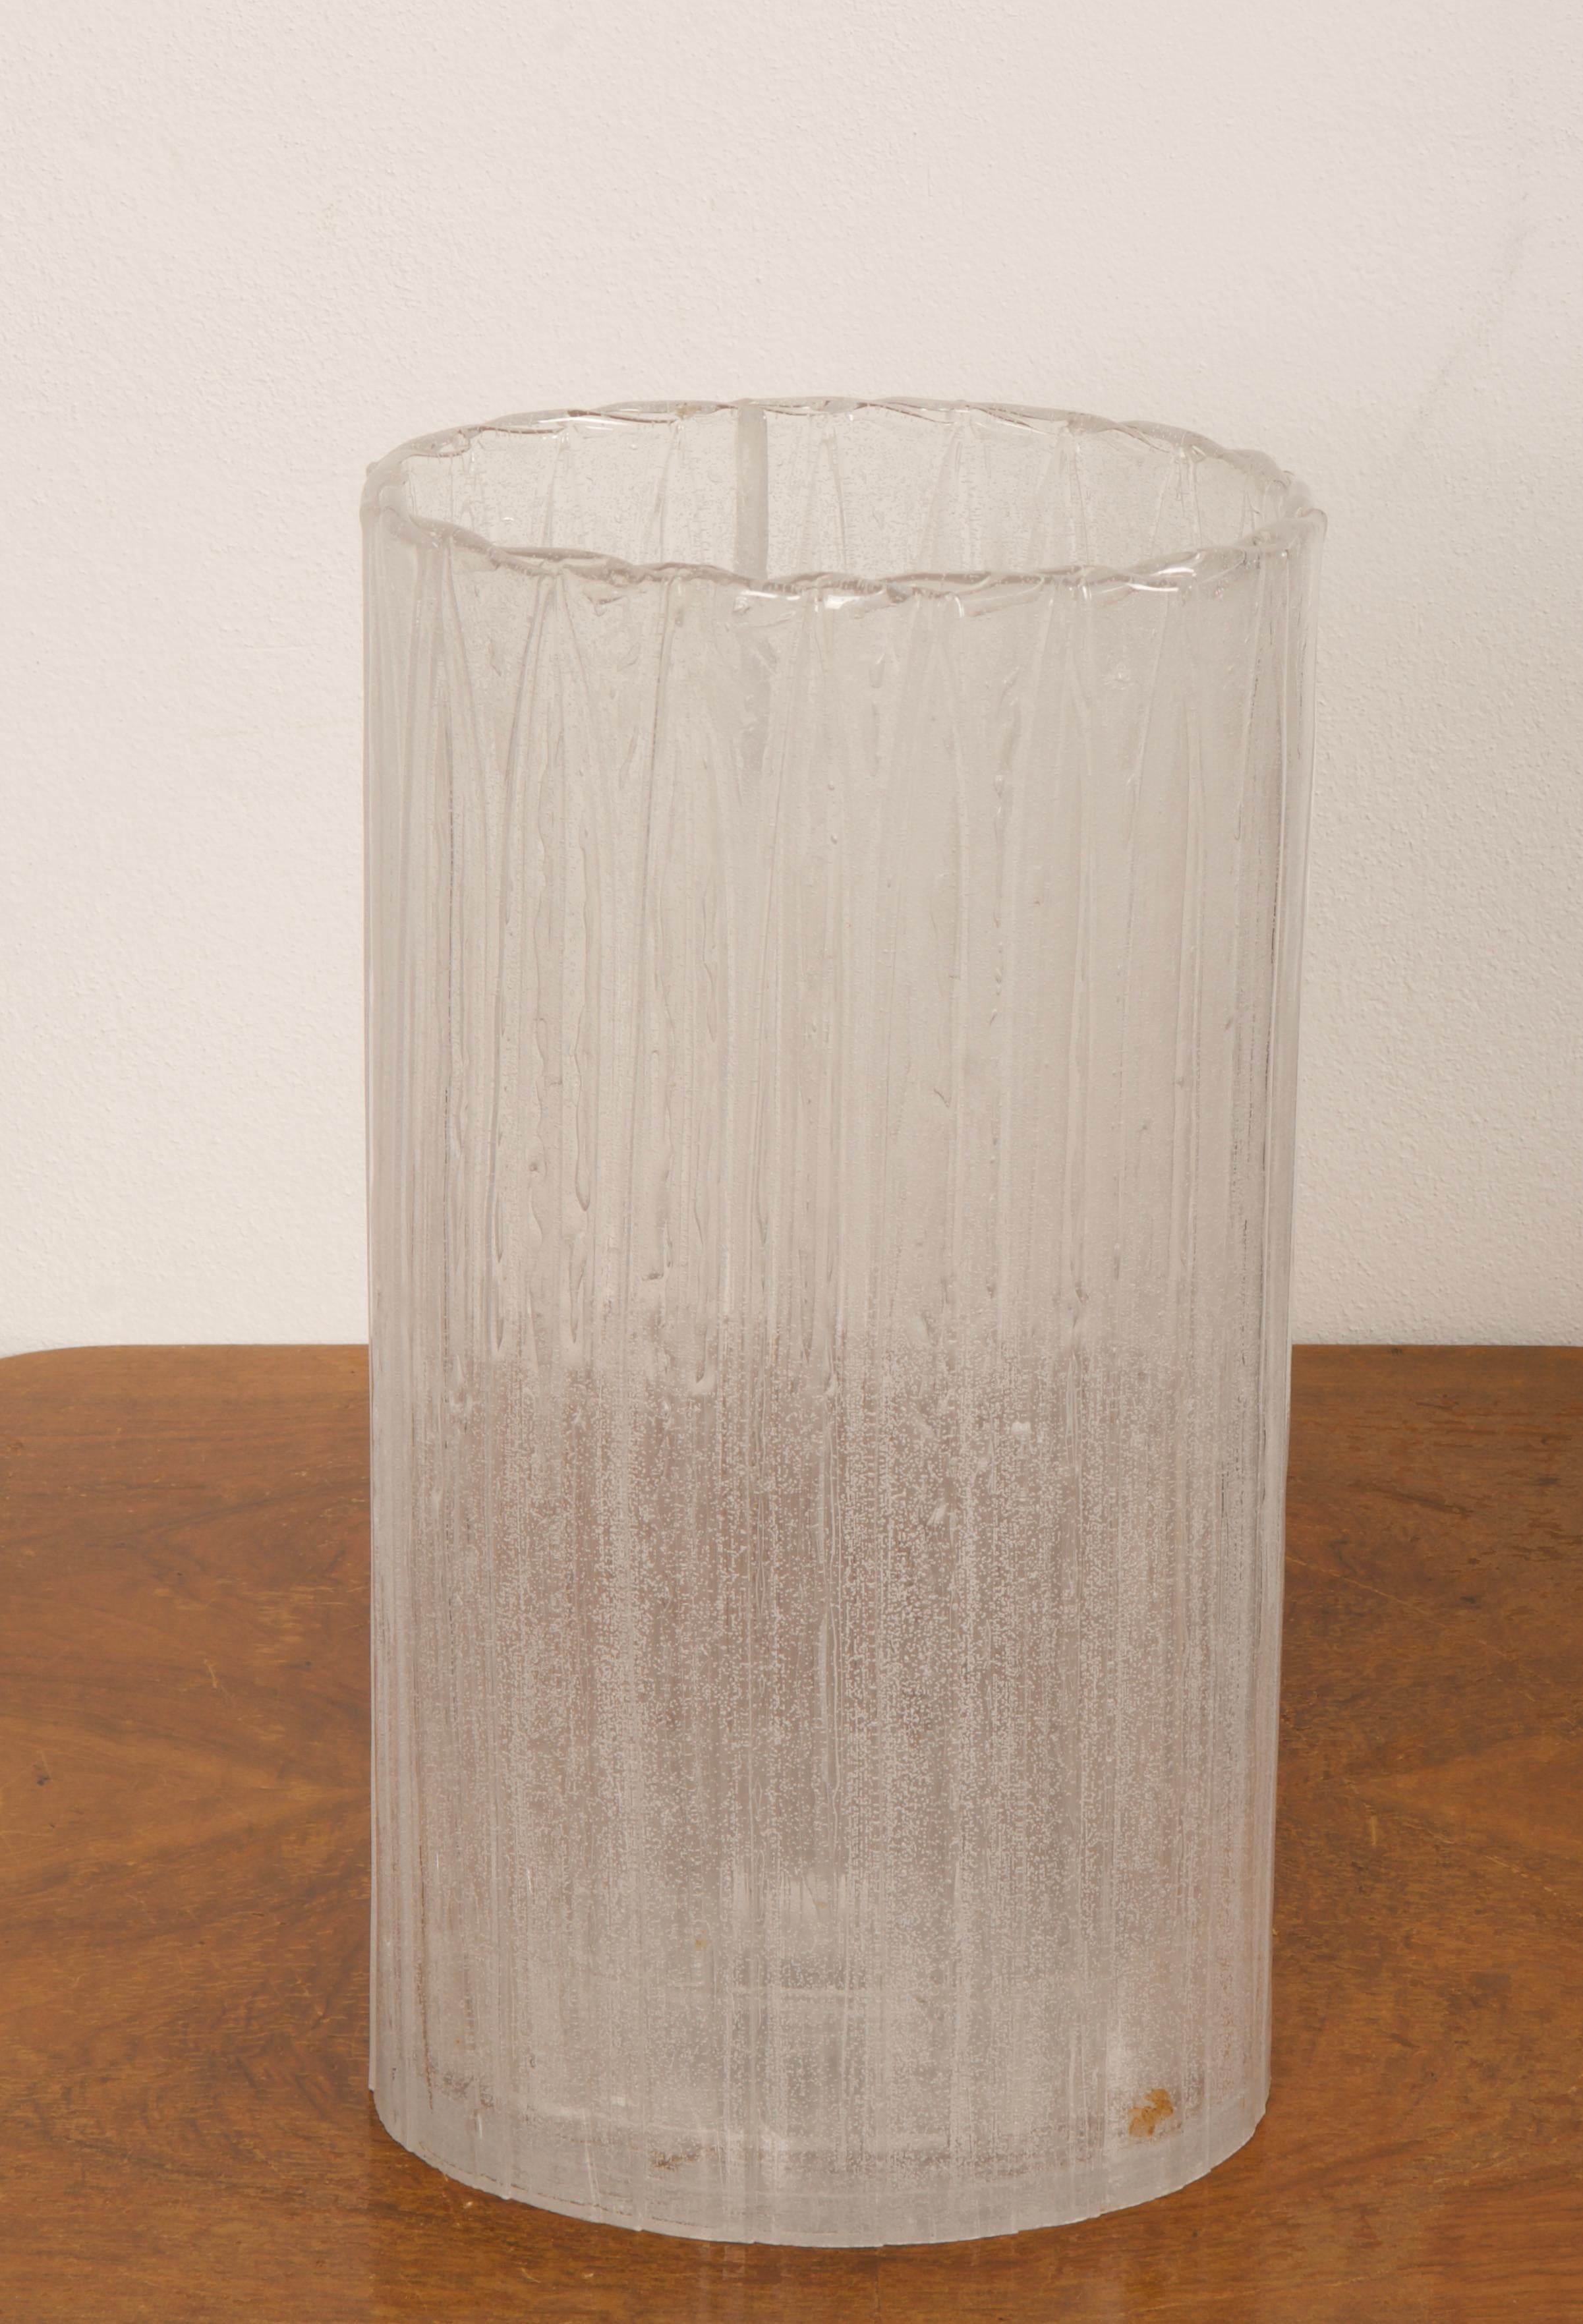 Lucite umbrella stand from the 1970.